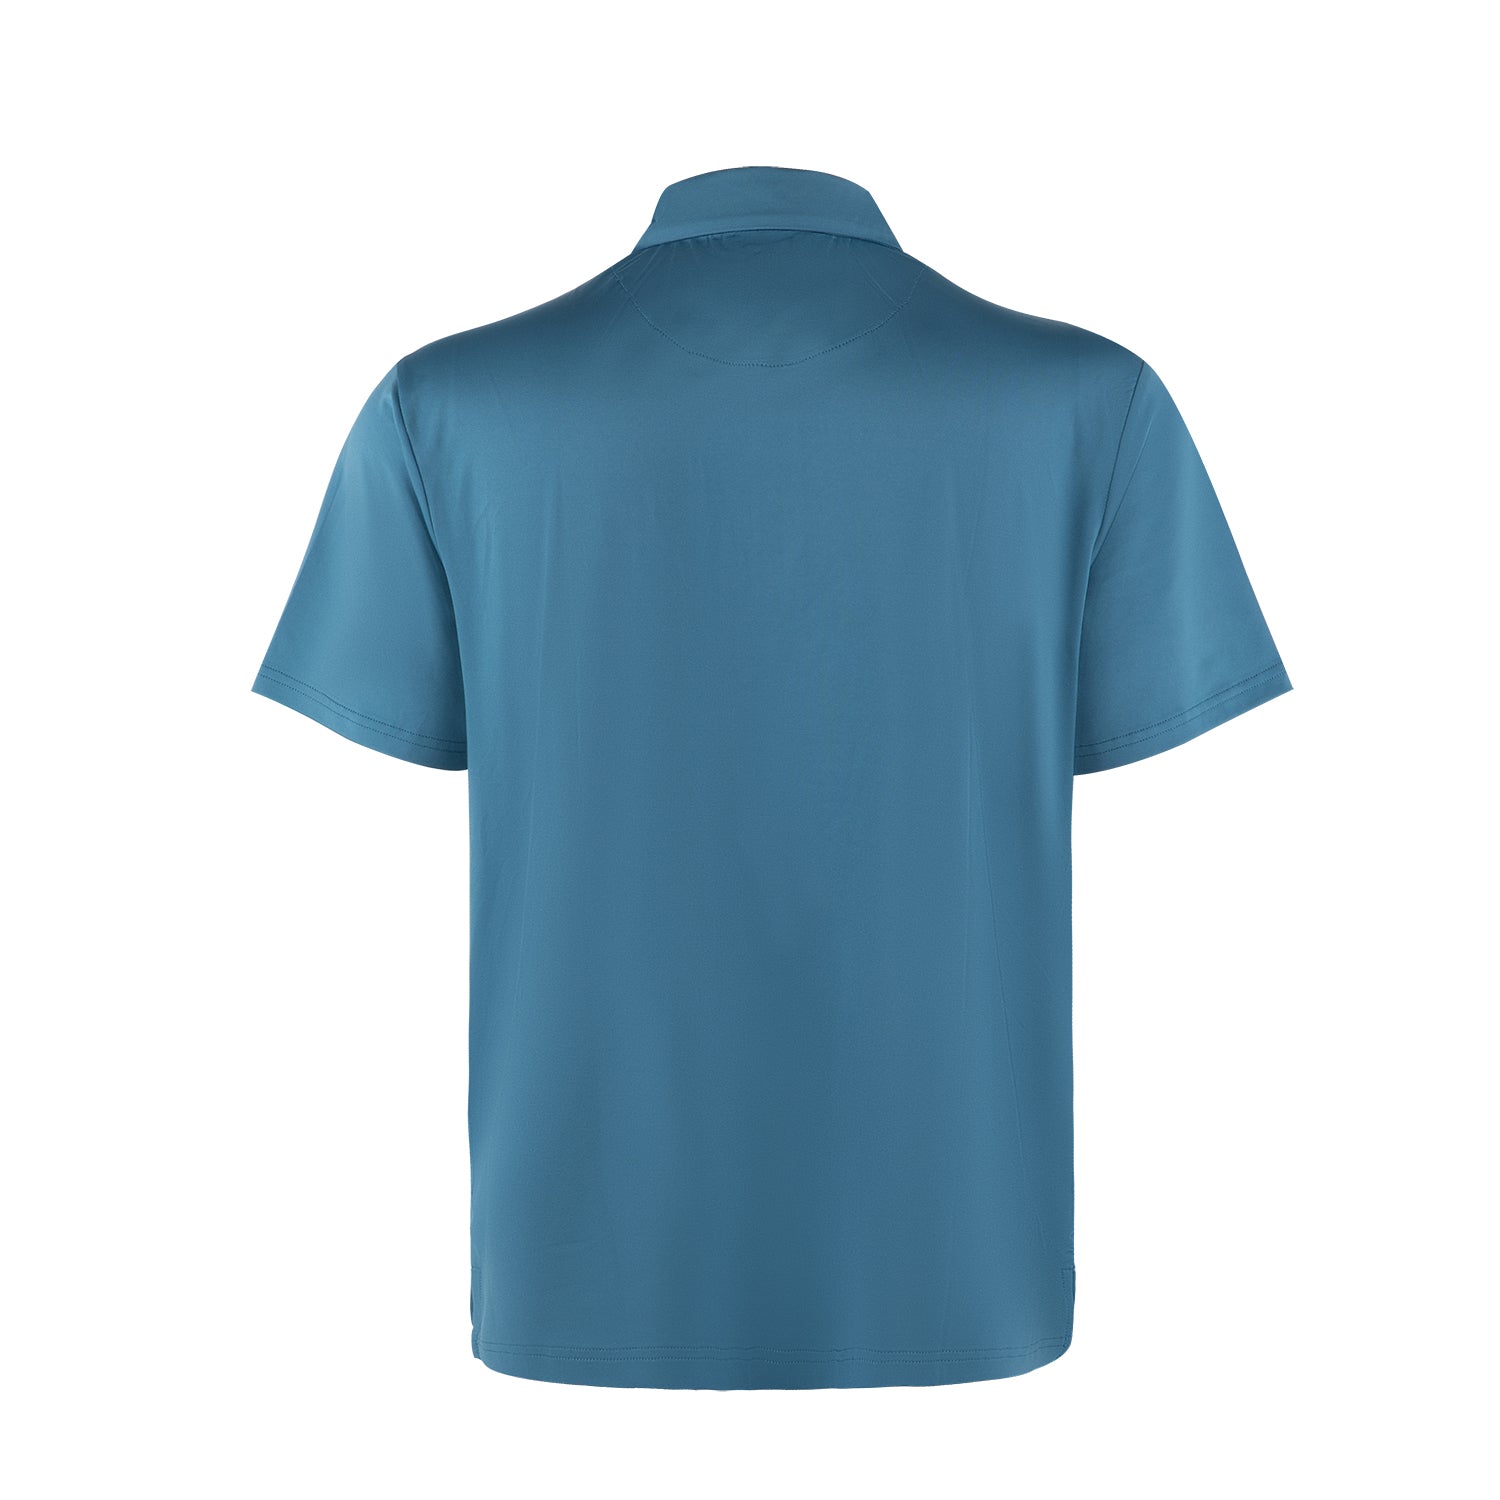 PRE-ORDER Jerry Garcia Premium Sky Blue Performance Polo - Section 119